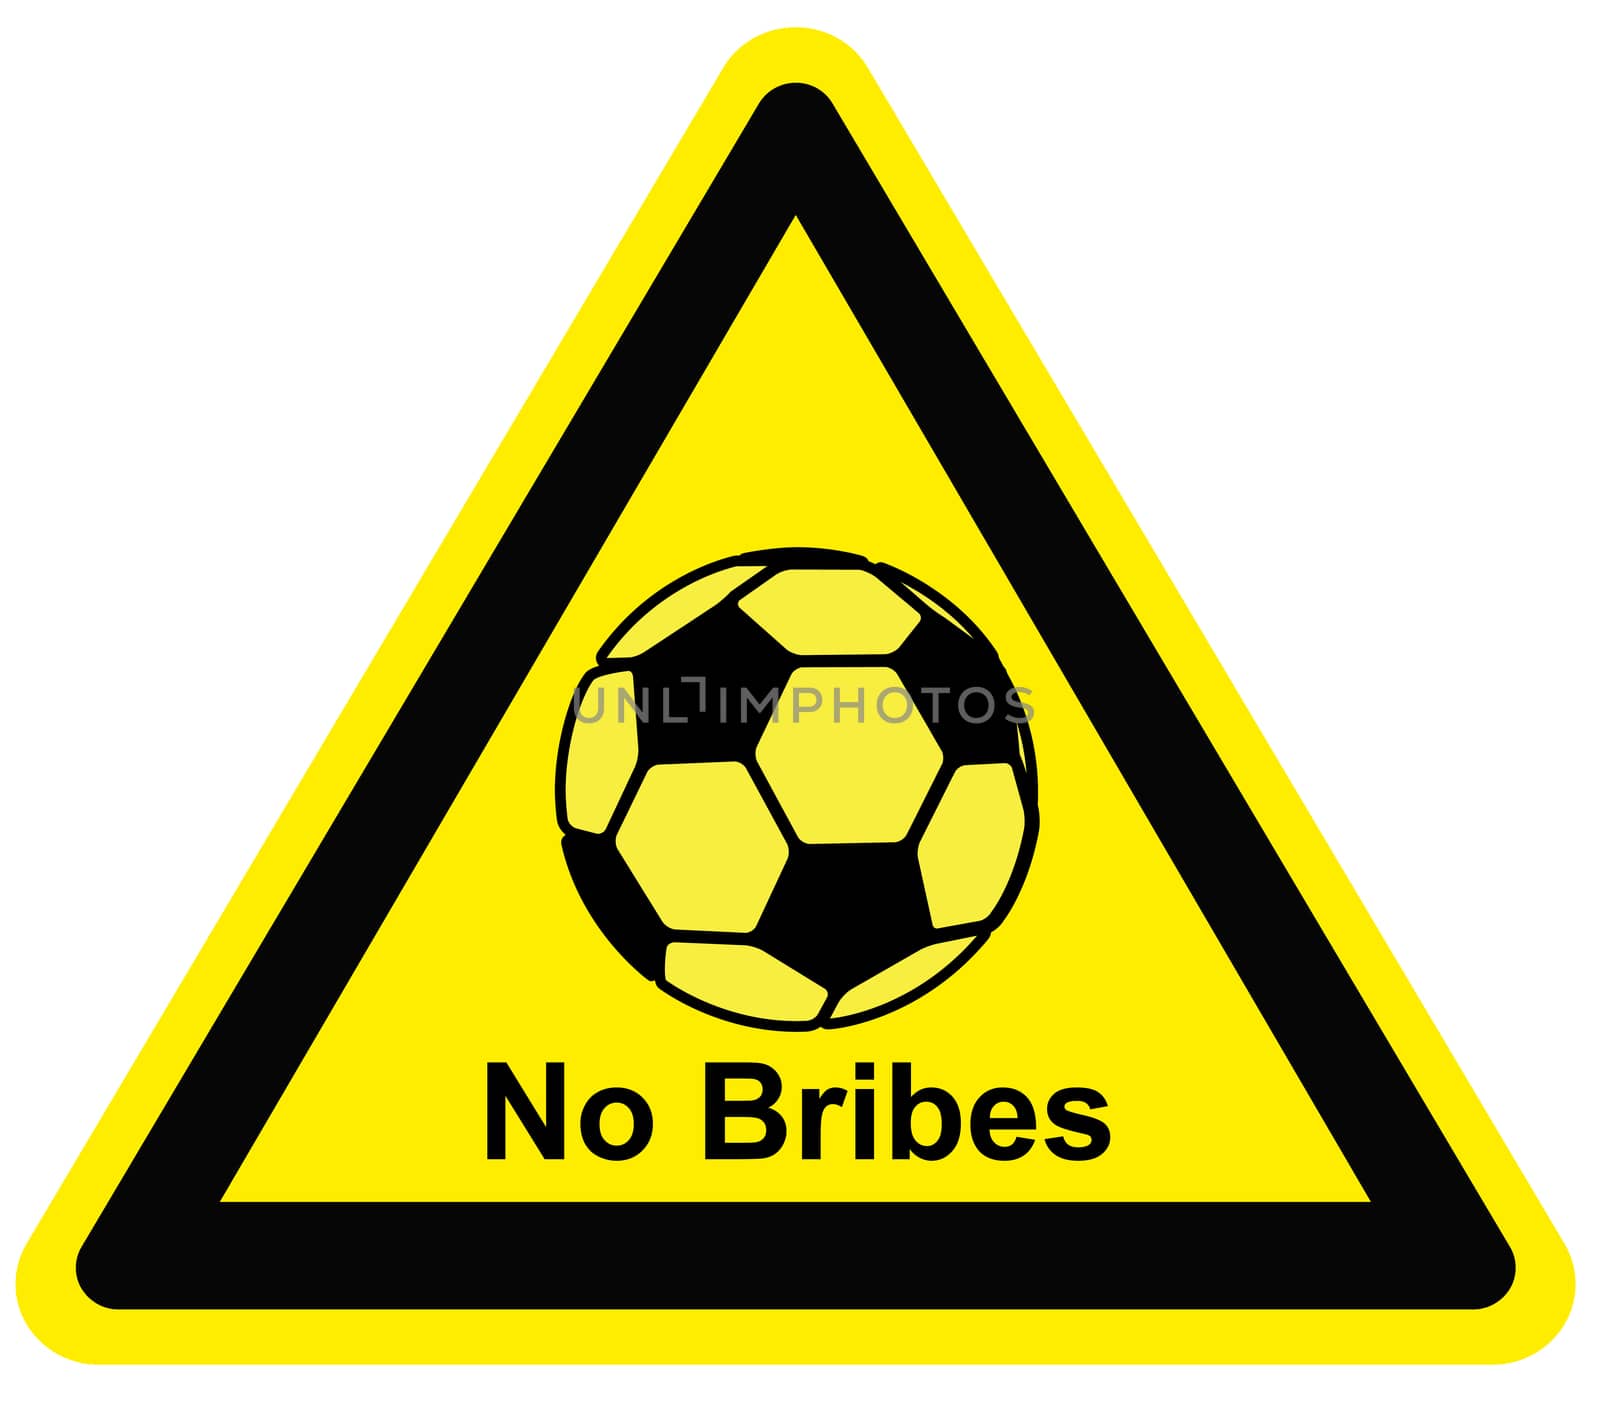 Concept sign to fight against bribery and corruption in ball games and sports in general